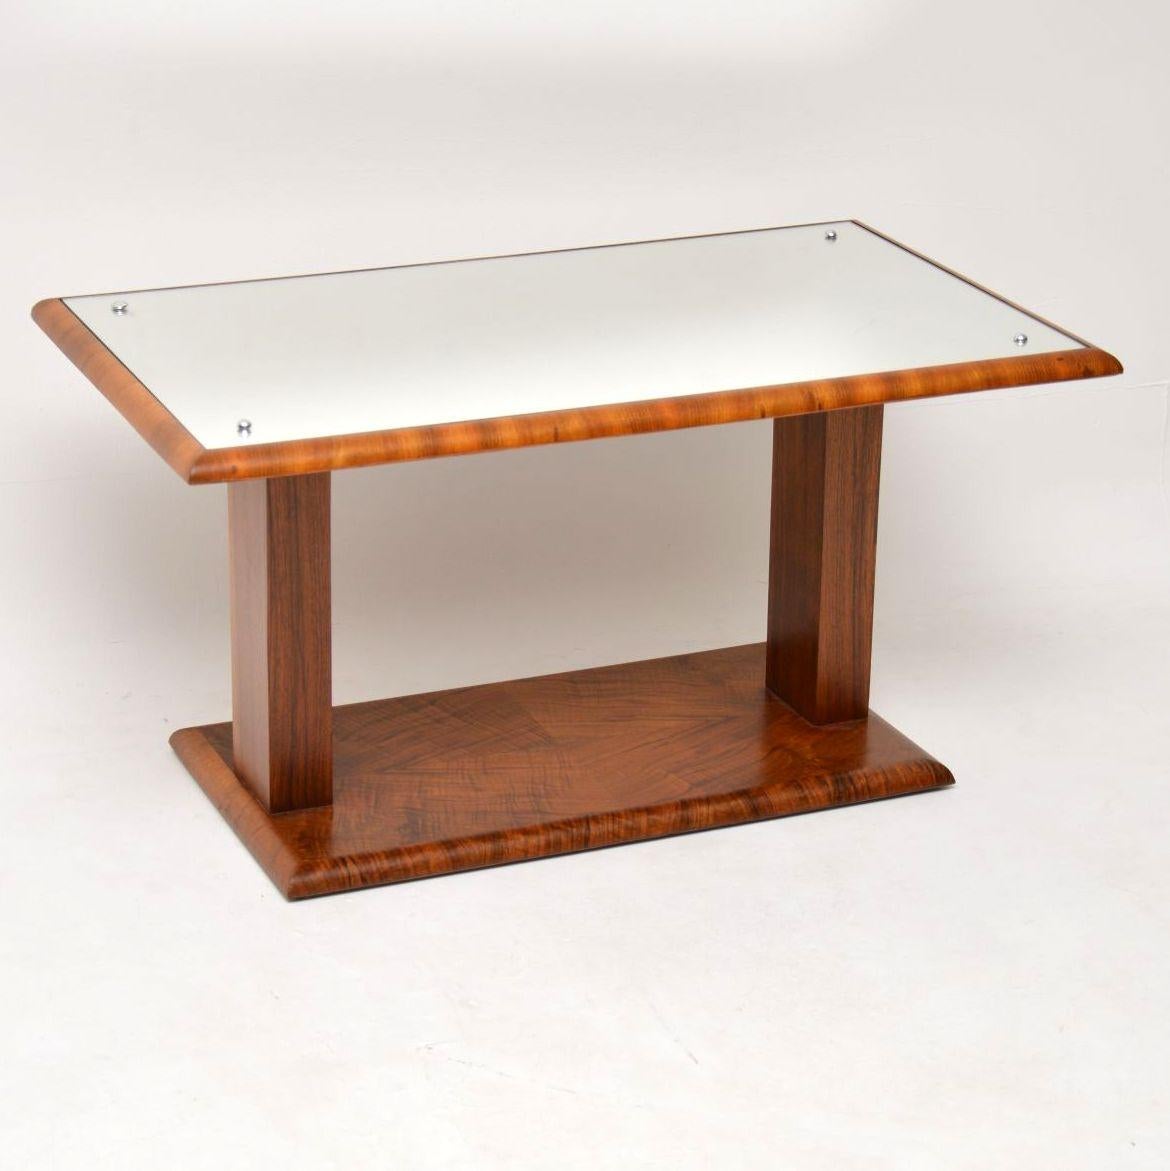 A beautiful original Art Deco period coffee table in walnut, with an inset mirrored top. This dates from the 1920-30’s, we have had it stripped and re-polished to a very high standard, the condition is superb throughout for its age. The colour and